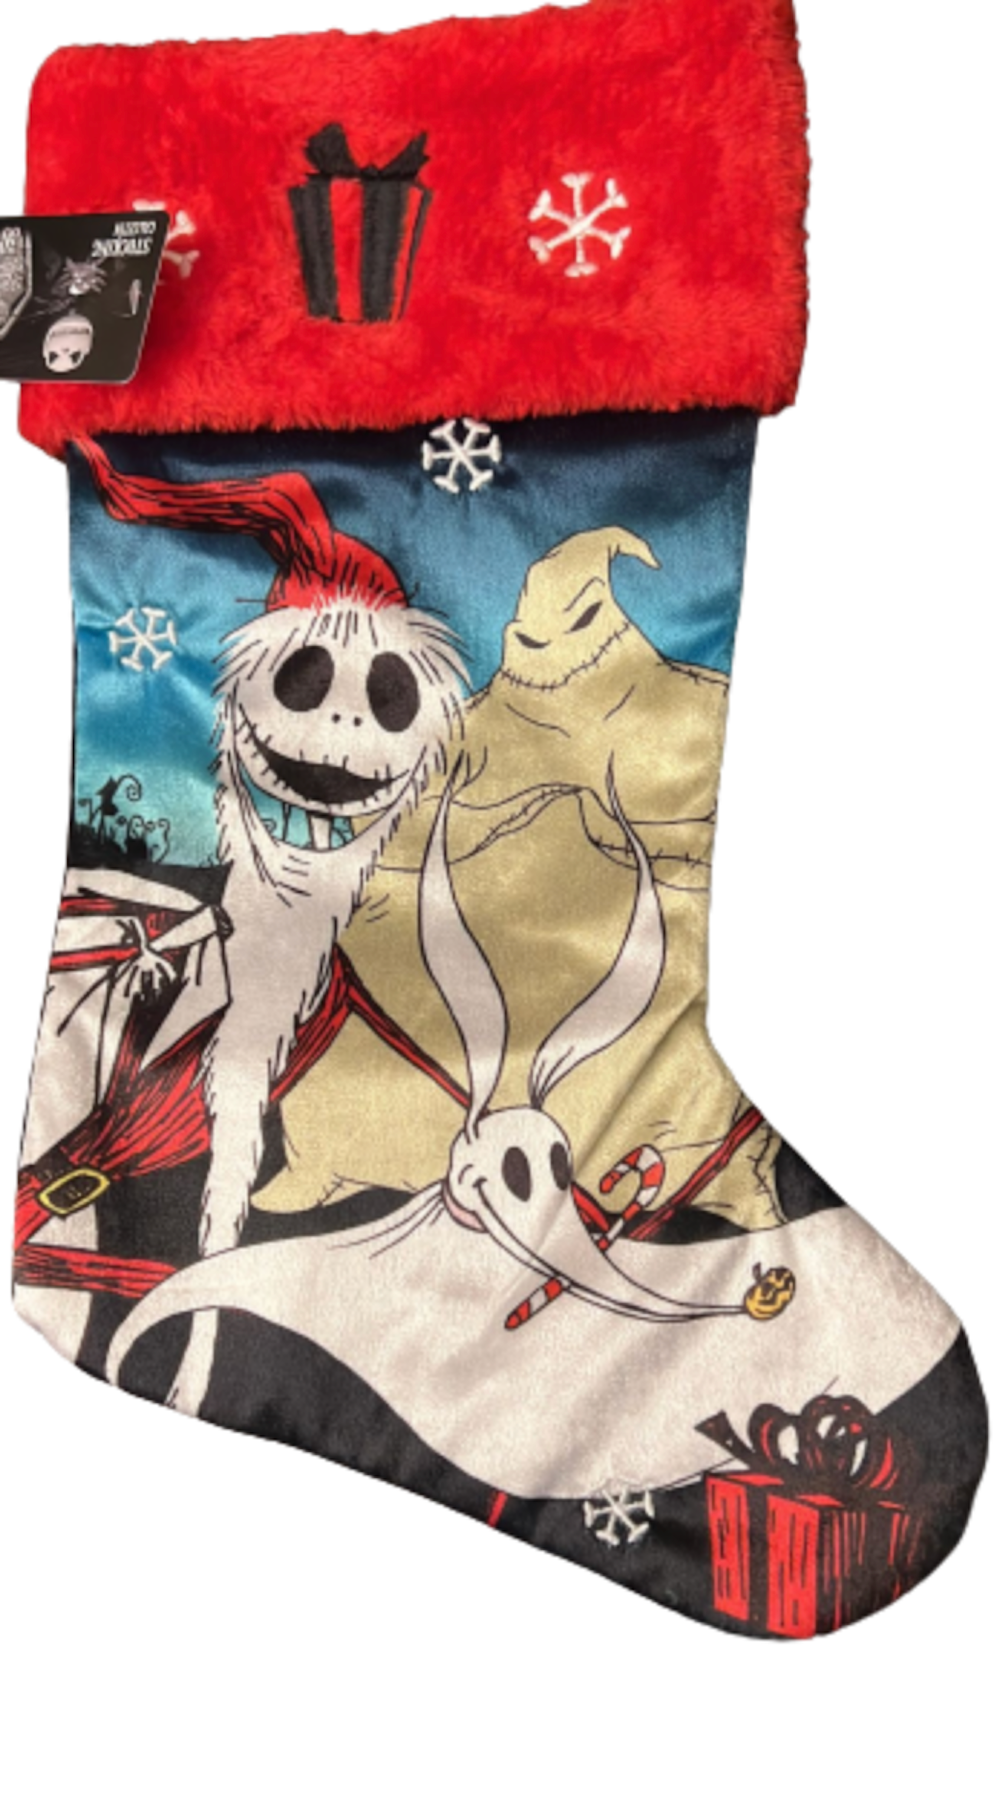 Disney The Nightmare Before Christmas Jack Zero Oogie Boogie Stocking New w Tag